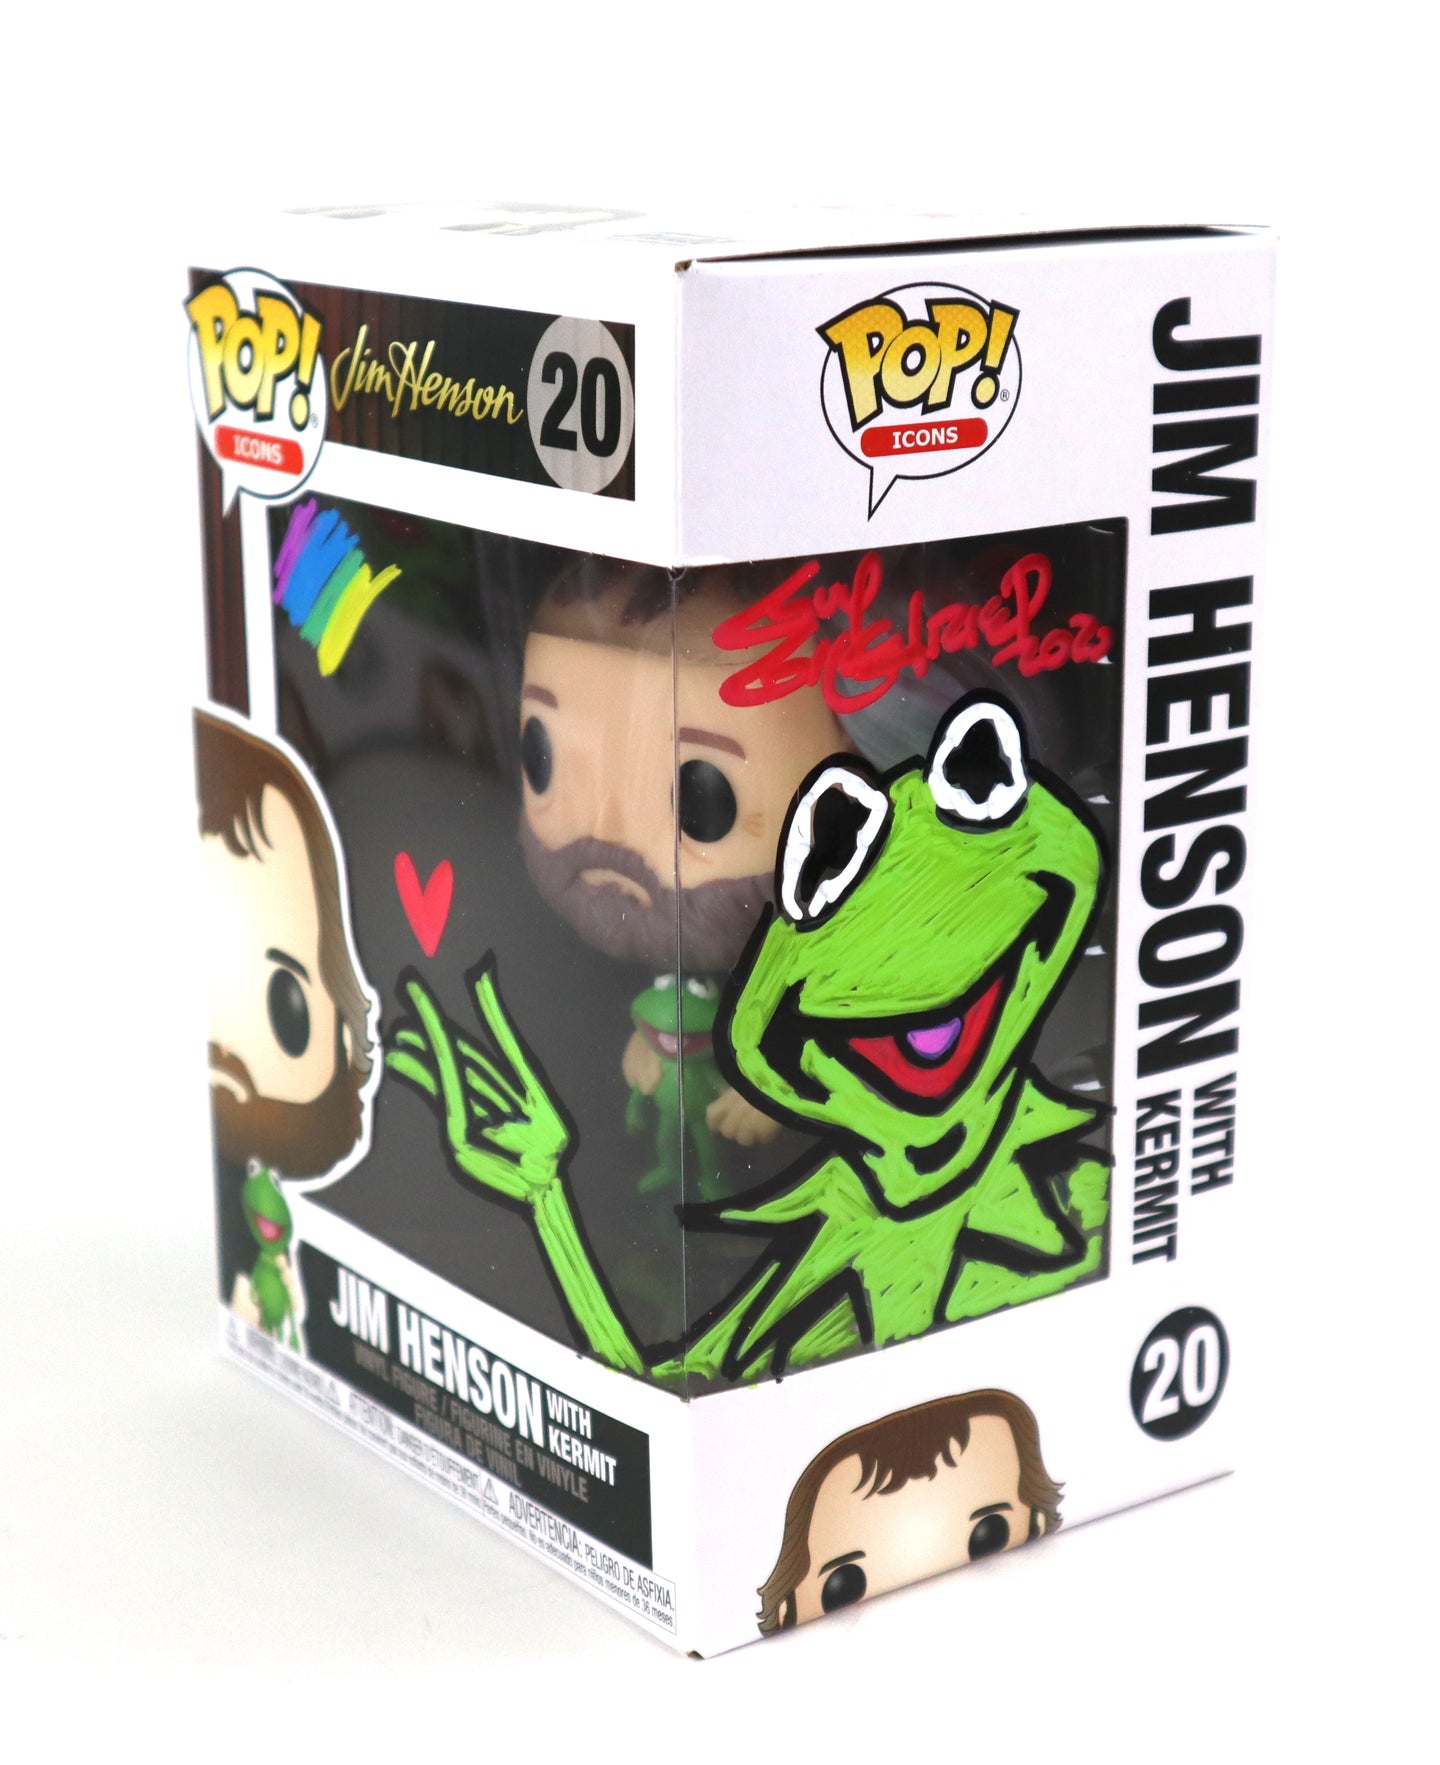 Jim Henson with Kermit Remark Funko POP #20  - Signed by Guy Gilchrist